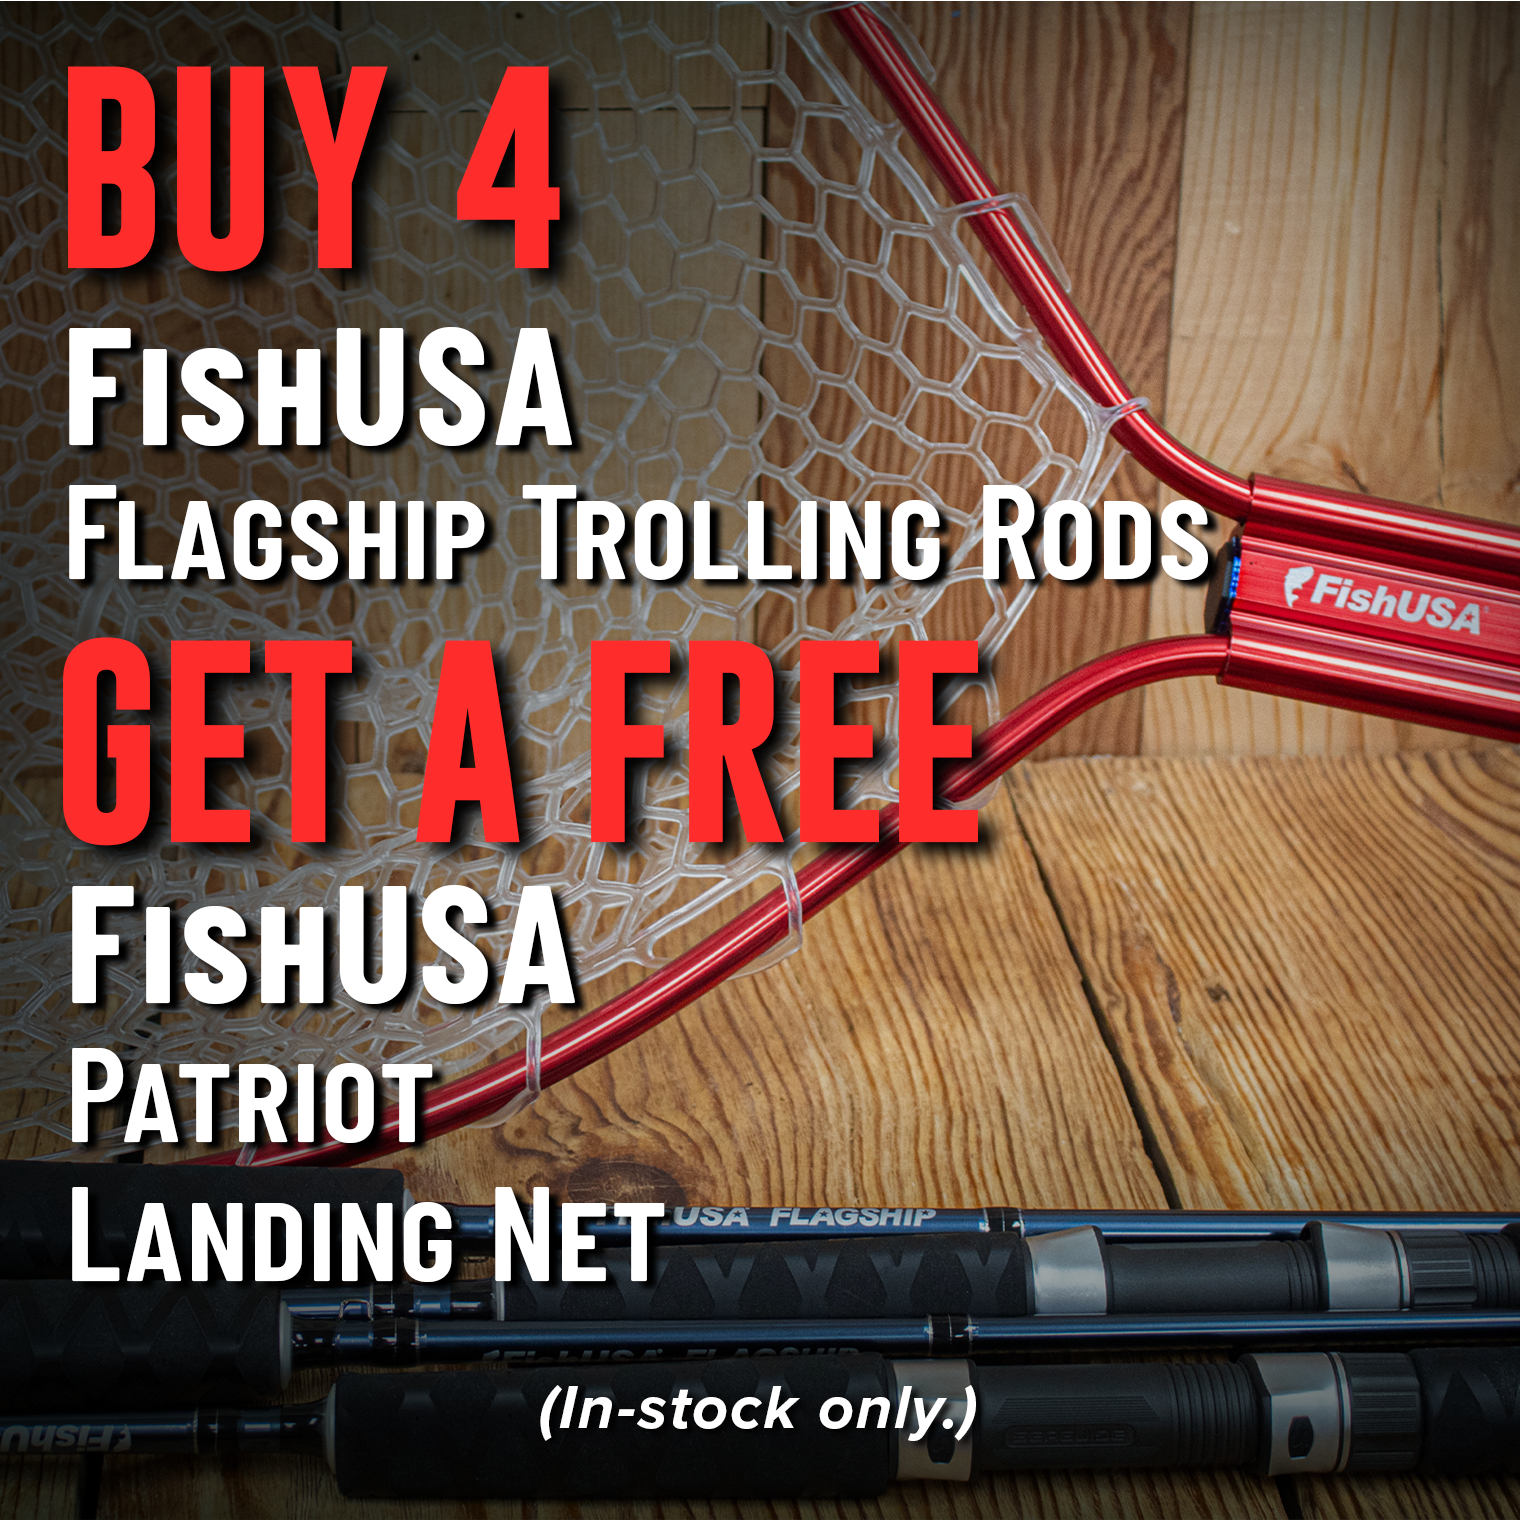 Buy 4 FishUSA Flagship Trolling Rods Get a Free FishUSA Patriot Landing Net (Must add net to cart. In-stock only.)